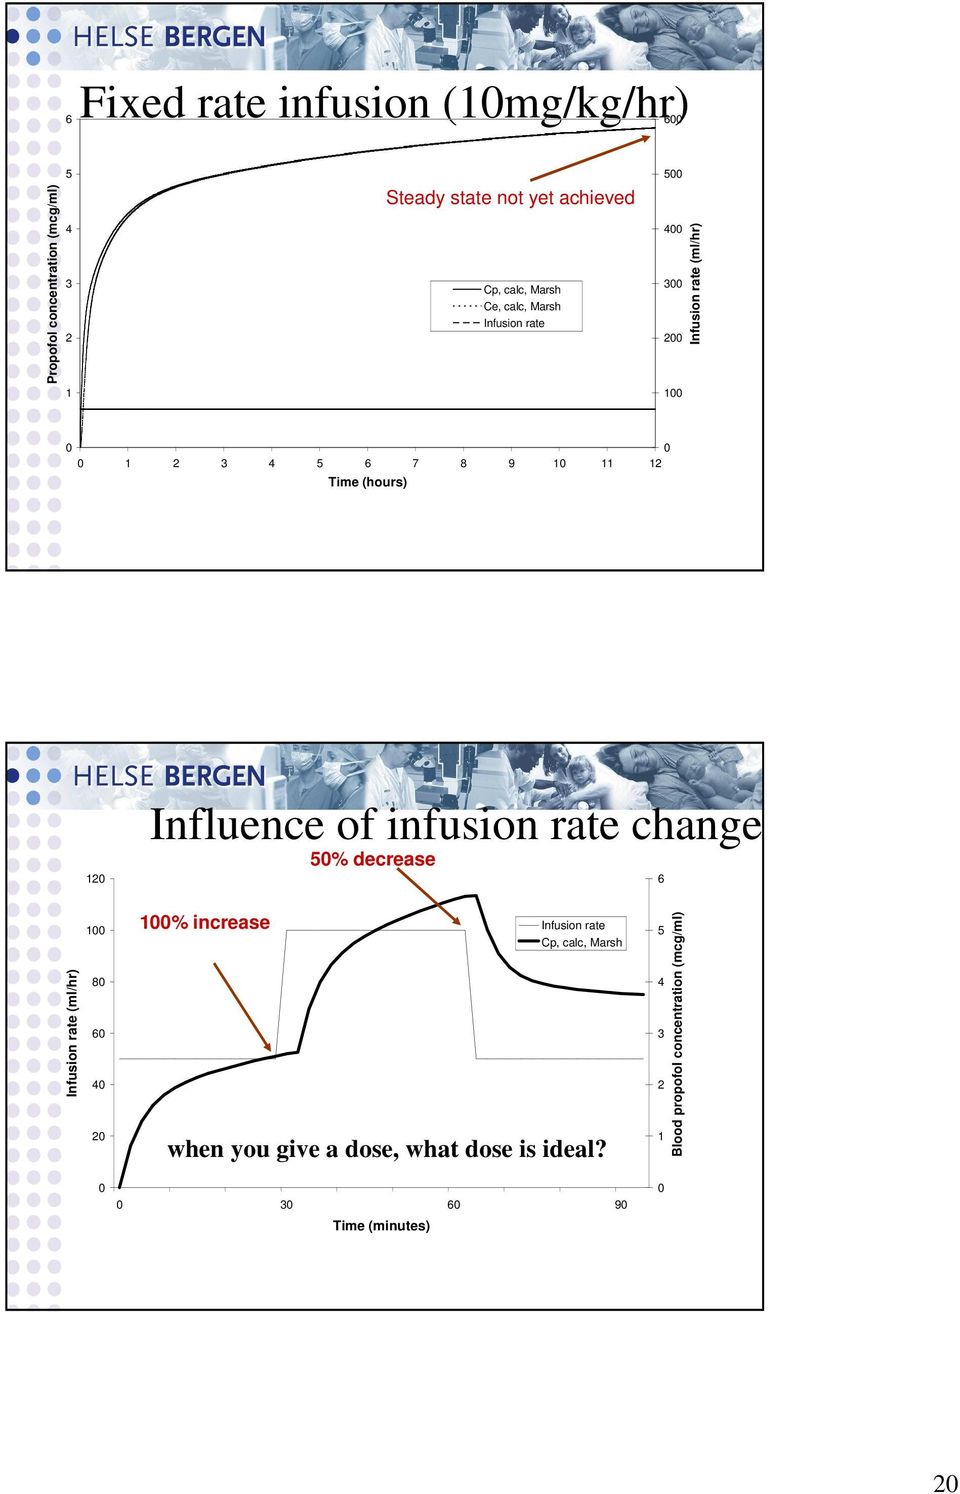 120 Influence of infusion rate changes 50% decrease 6 Infusion rate (ml/hr) 100 80 60 40 20 0 100% increase 0 30 60 90 Time